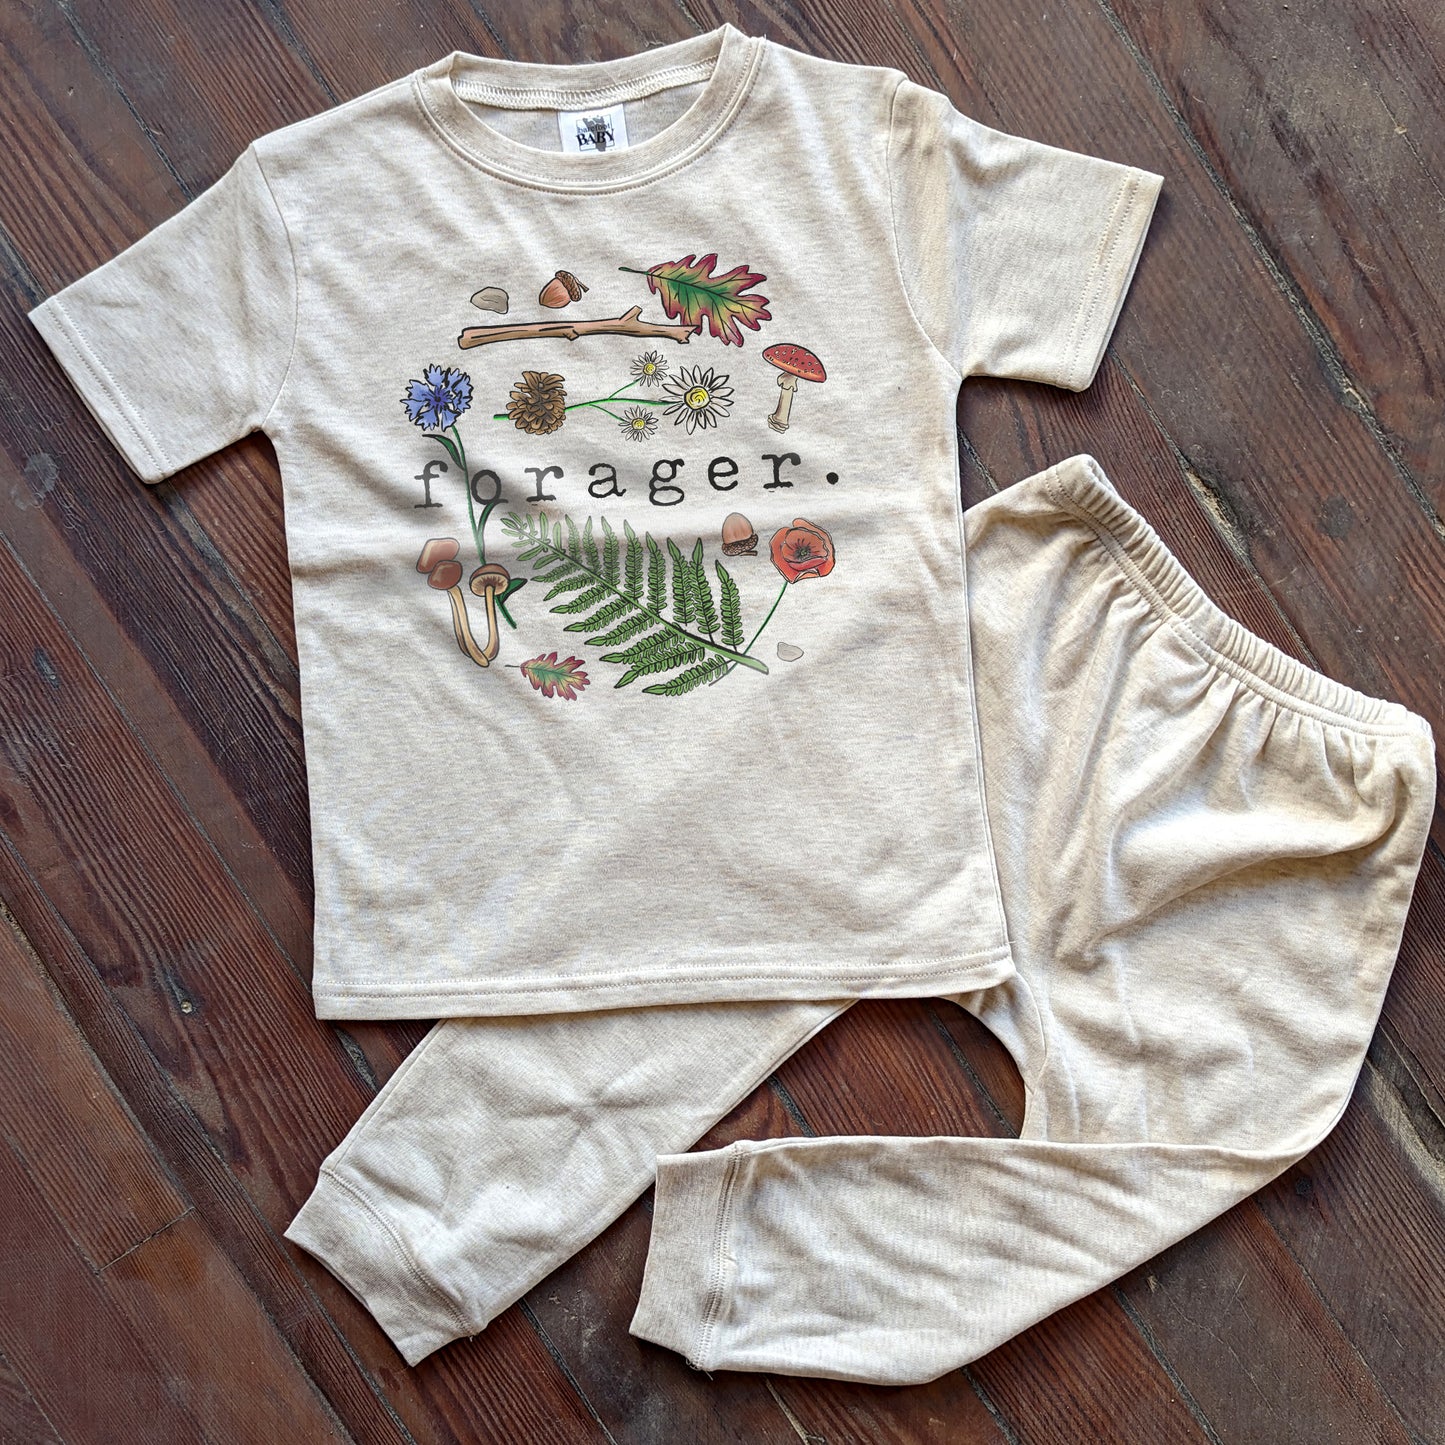 "Forager" Sleep 'n Play Set | Size 2T through 5T | Includes Shirt & Joggers